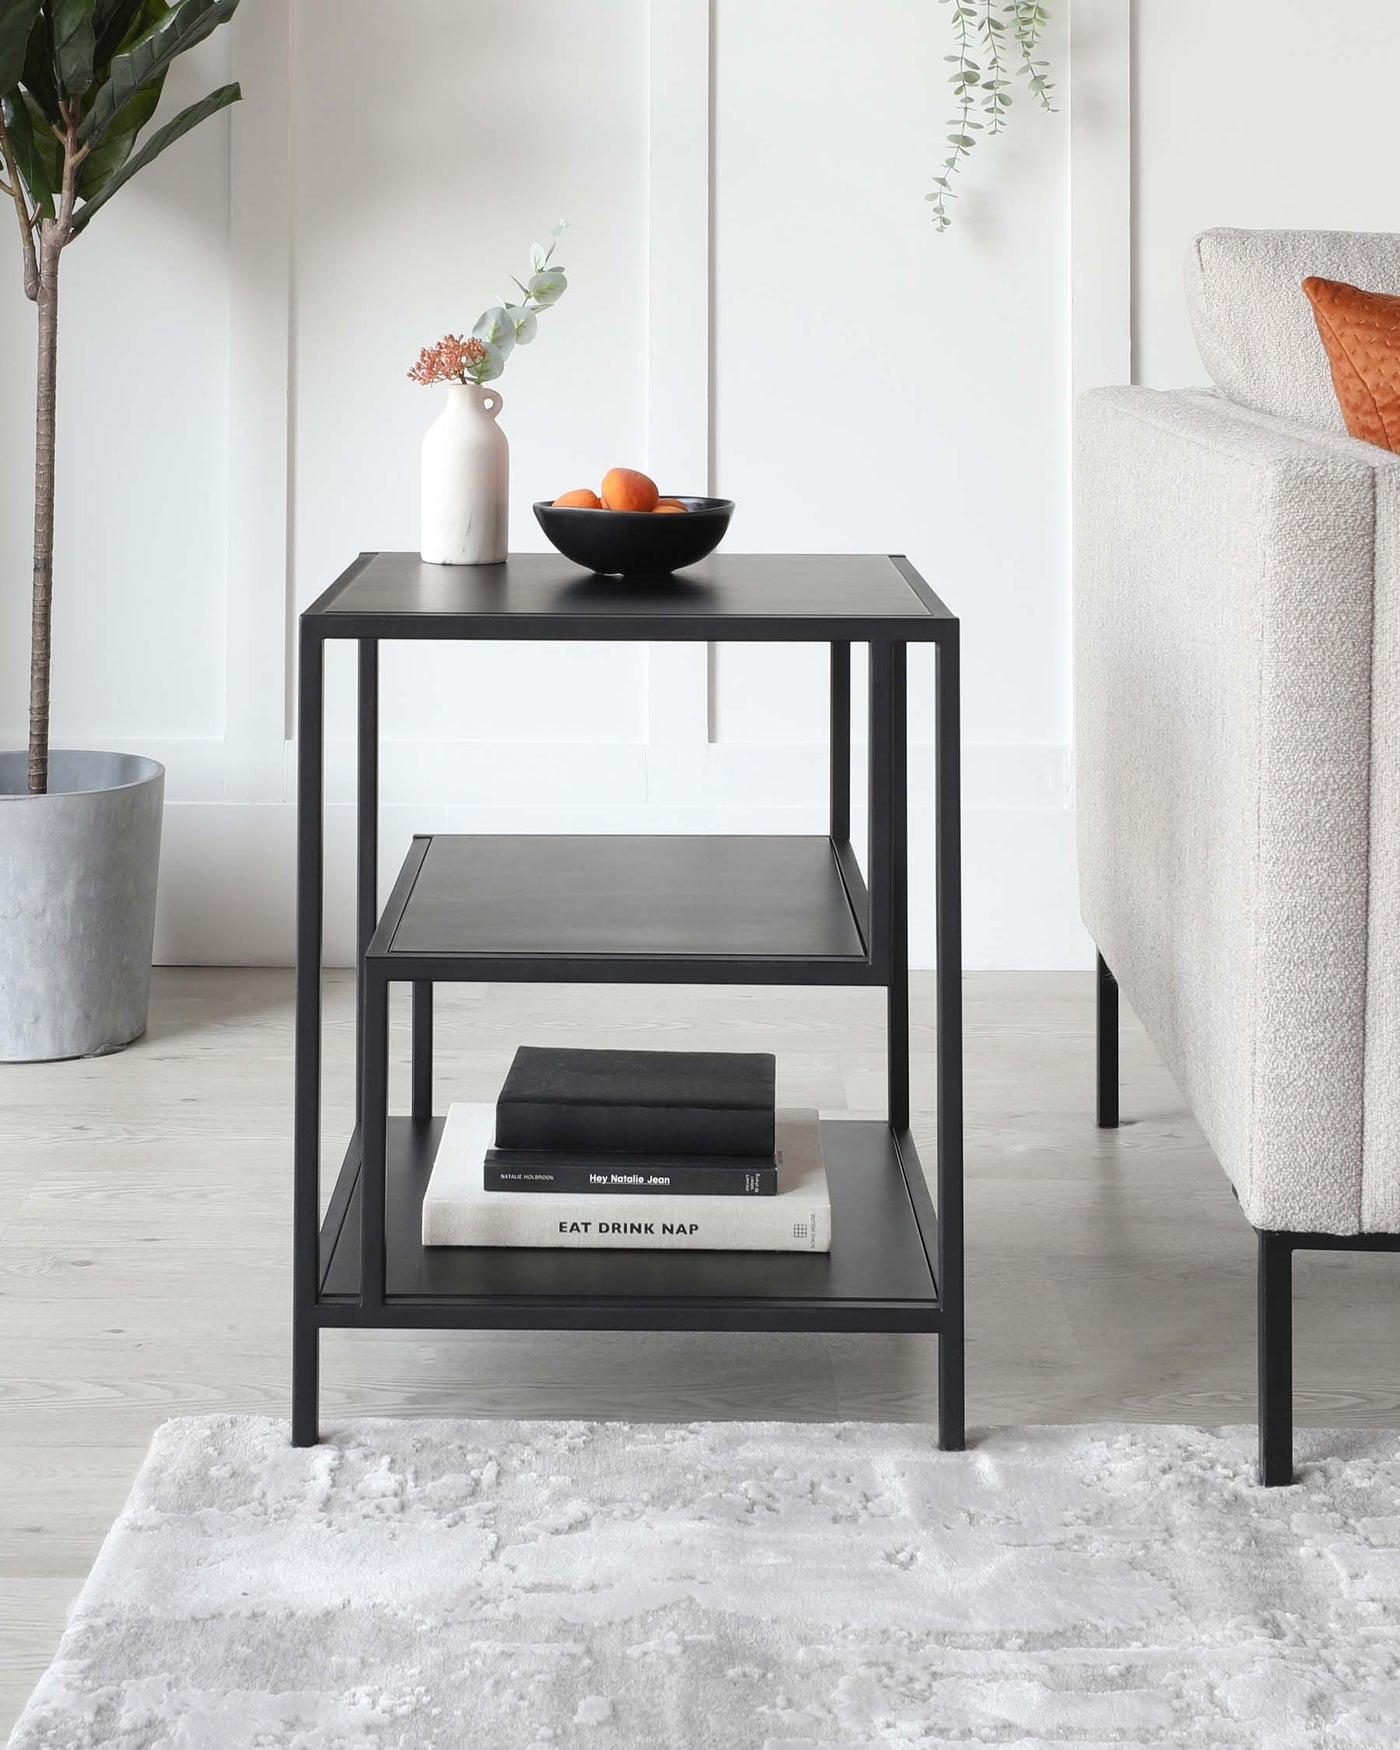 A modern, sleek three-tiered black side table with a minimalist design, displayed in a living area next to a sofa. The upper level holds a white vase with flowers and a black bowl with fruit, while the middle shelf contains neatly stacked books.